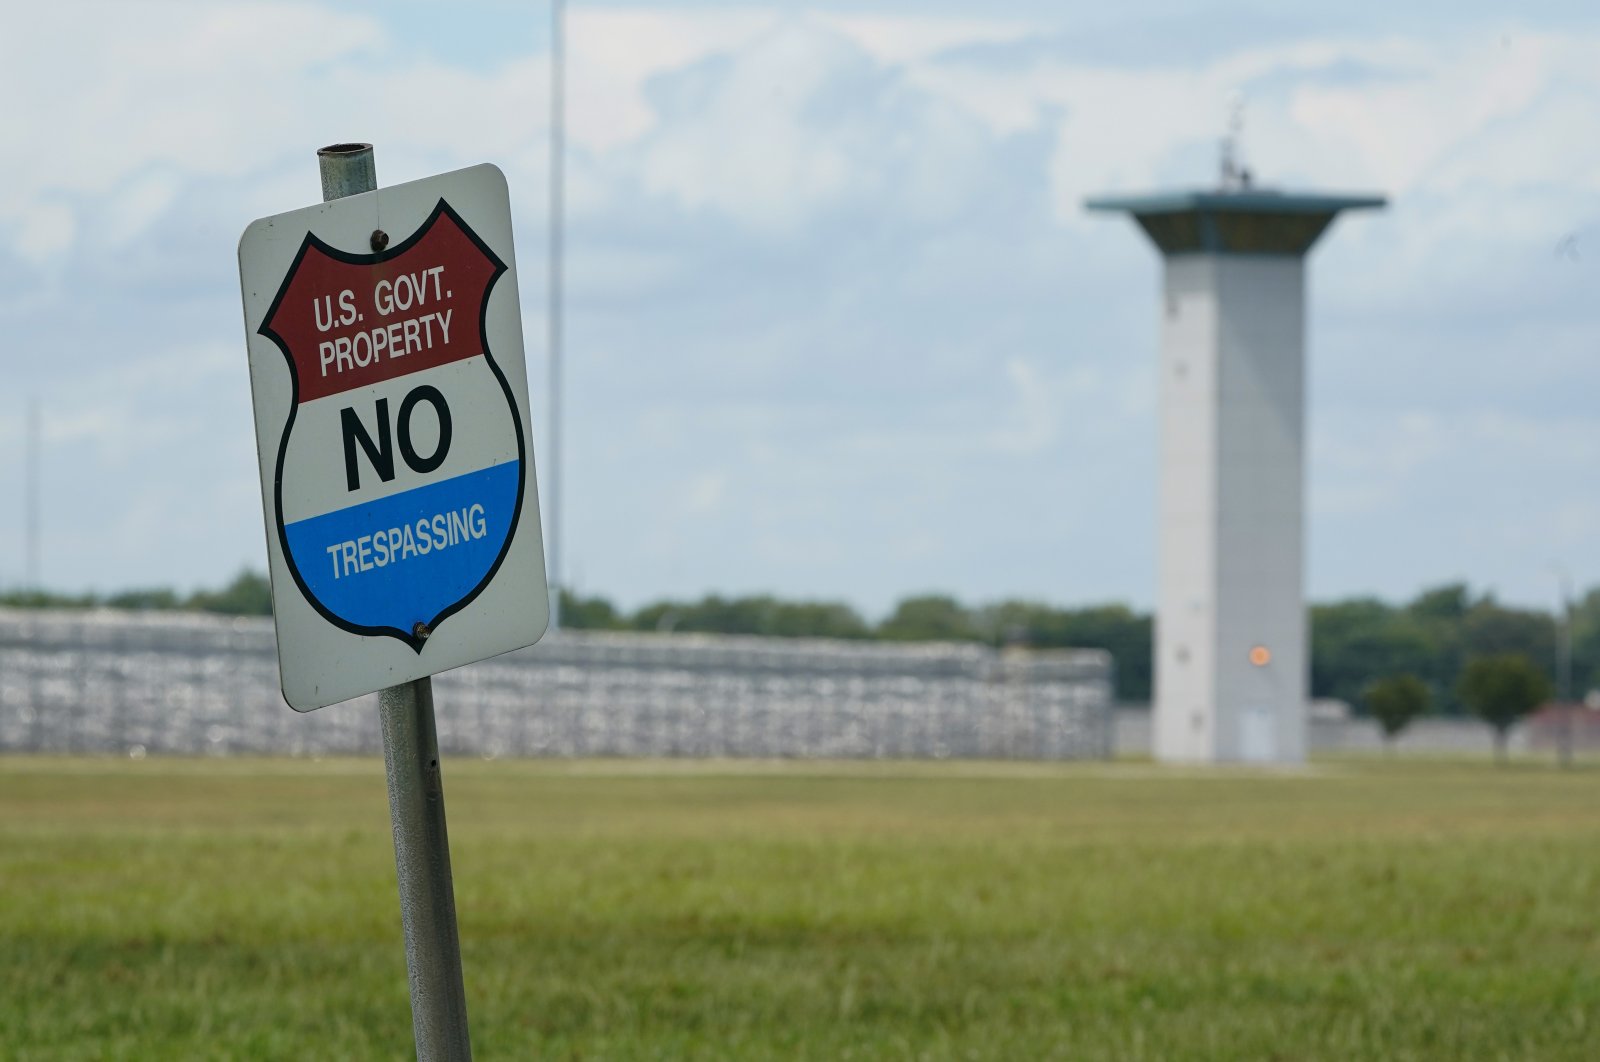 A no trespassing sign is displayed outside the federal prison complex in Terre Haute, Indiana, U.S., Aug. 28, 2020. (AP Photo)